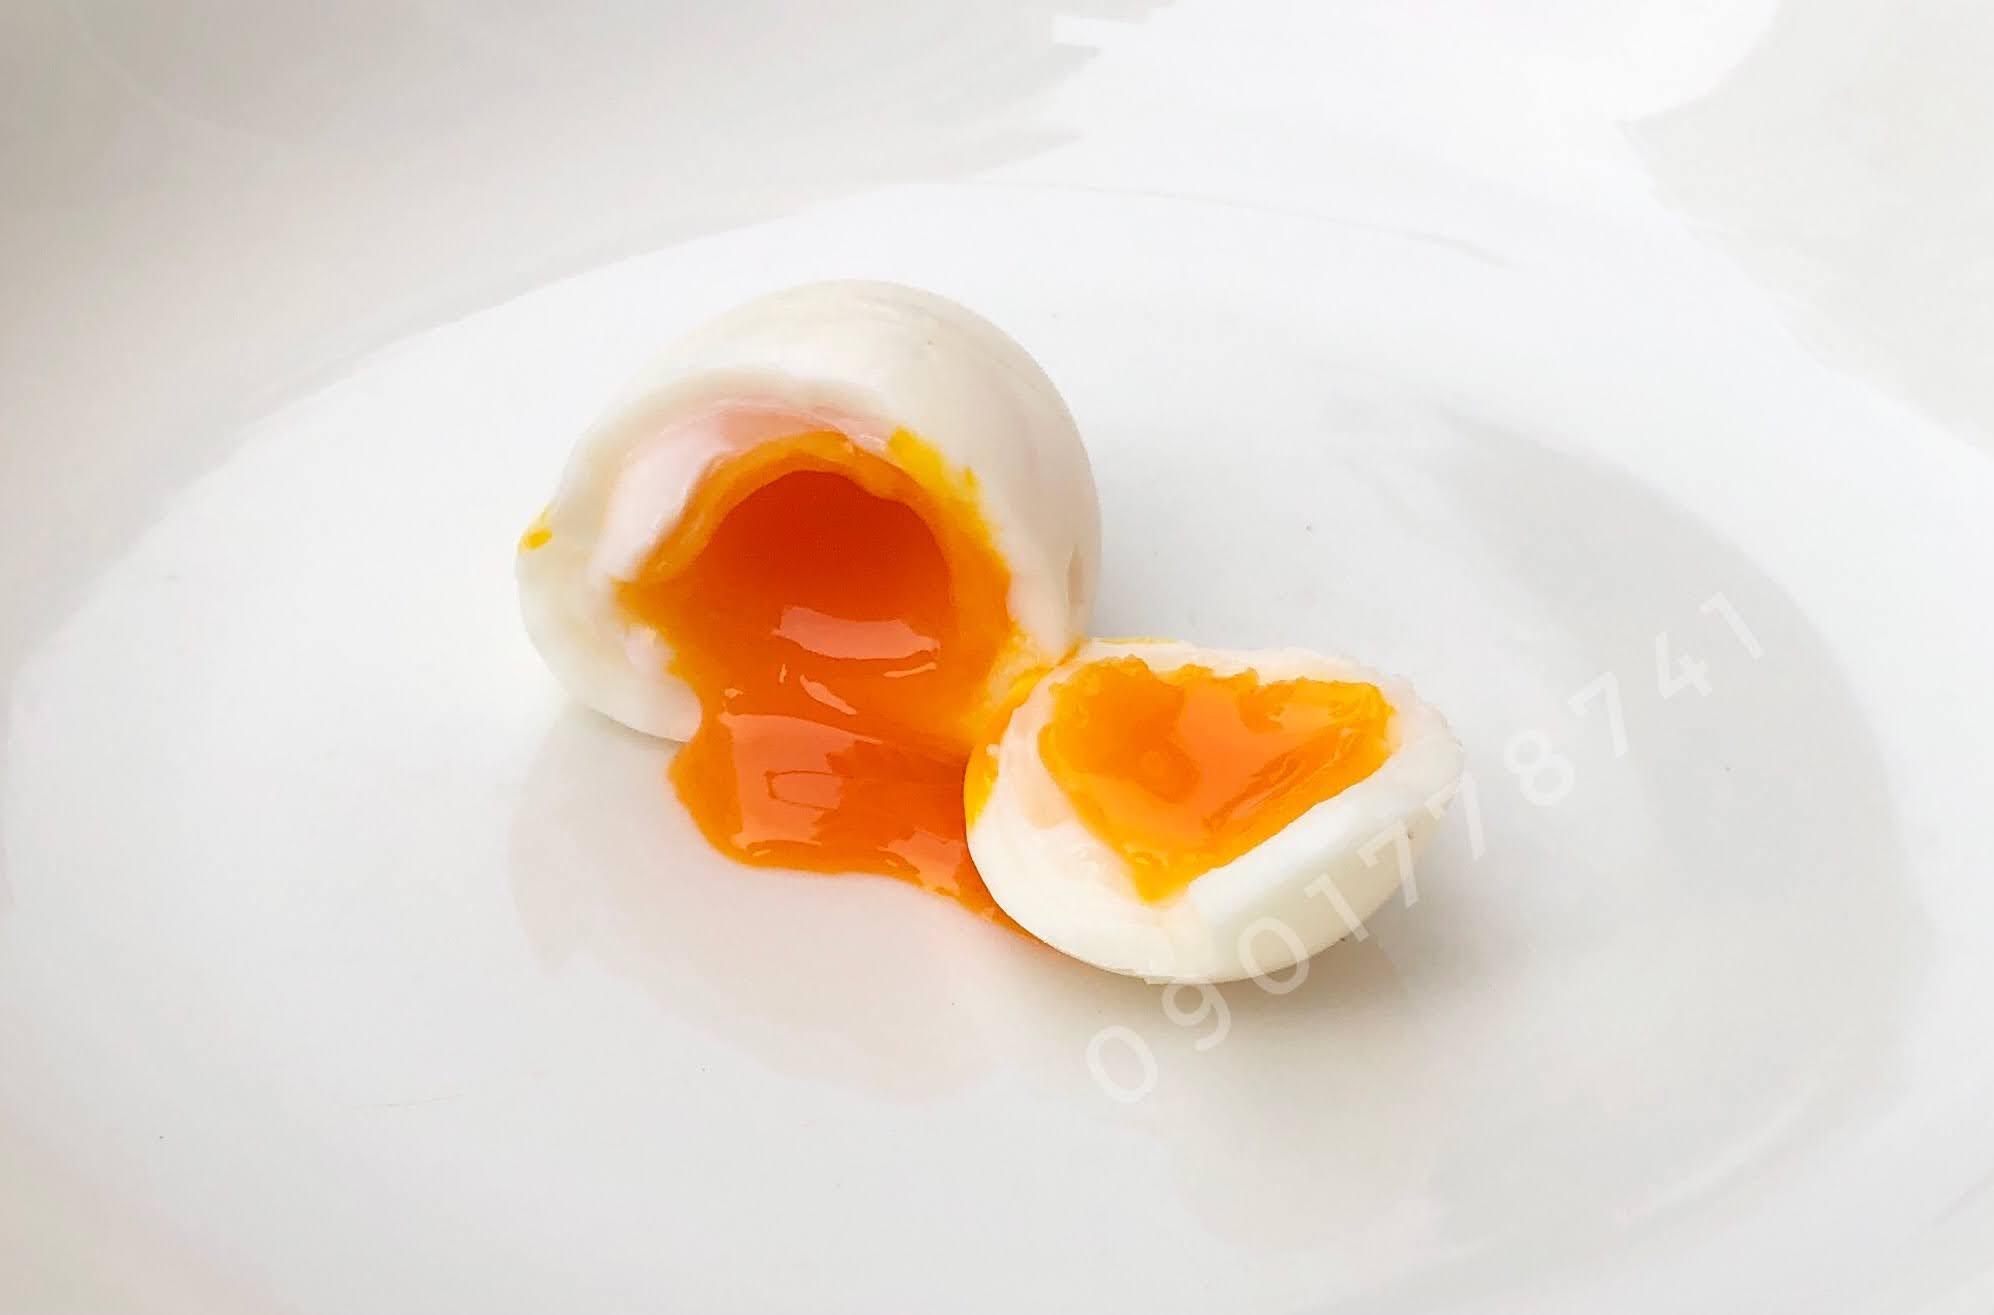 Raw and Ready: A Guide to Safely Eating Raw Silkie Eggs